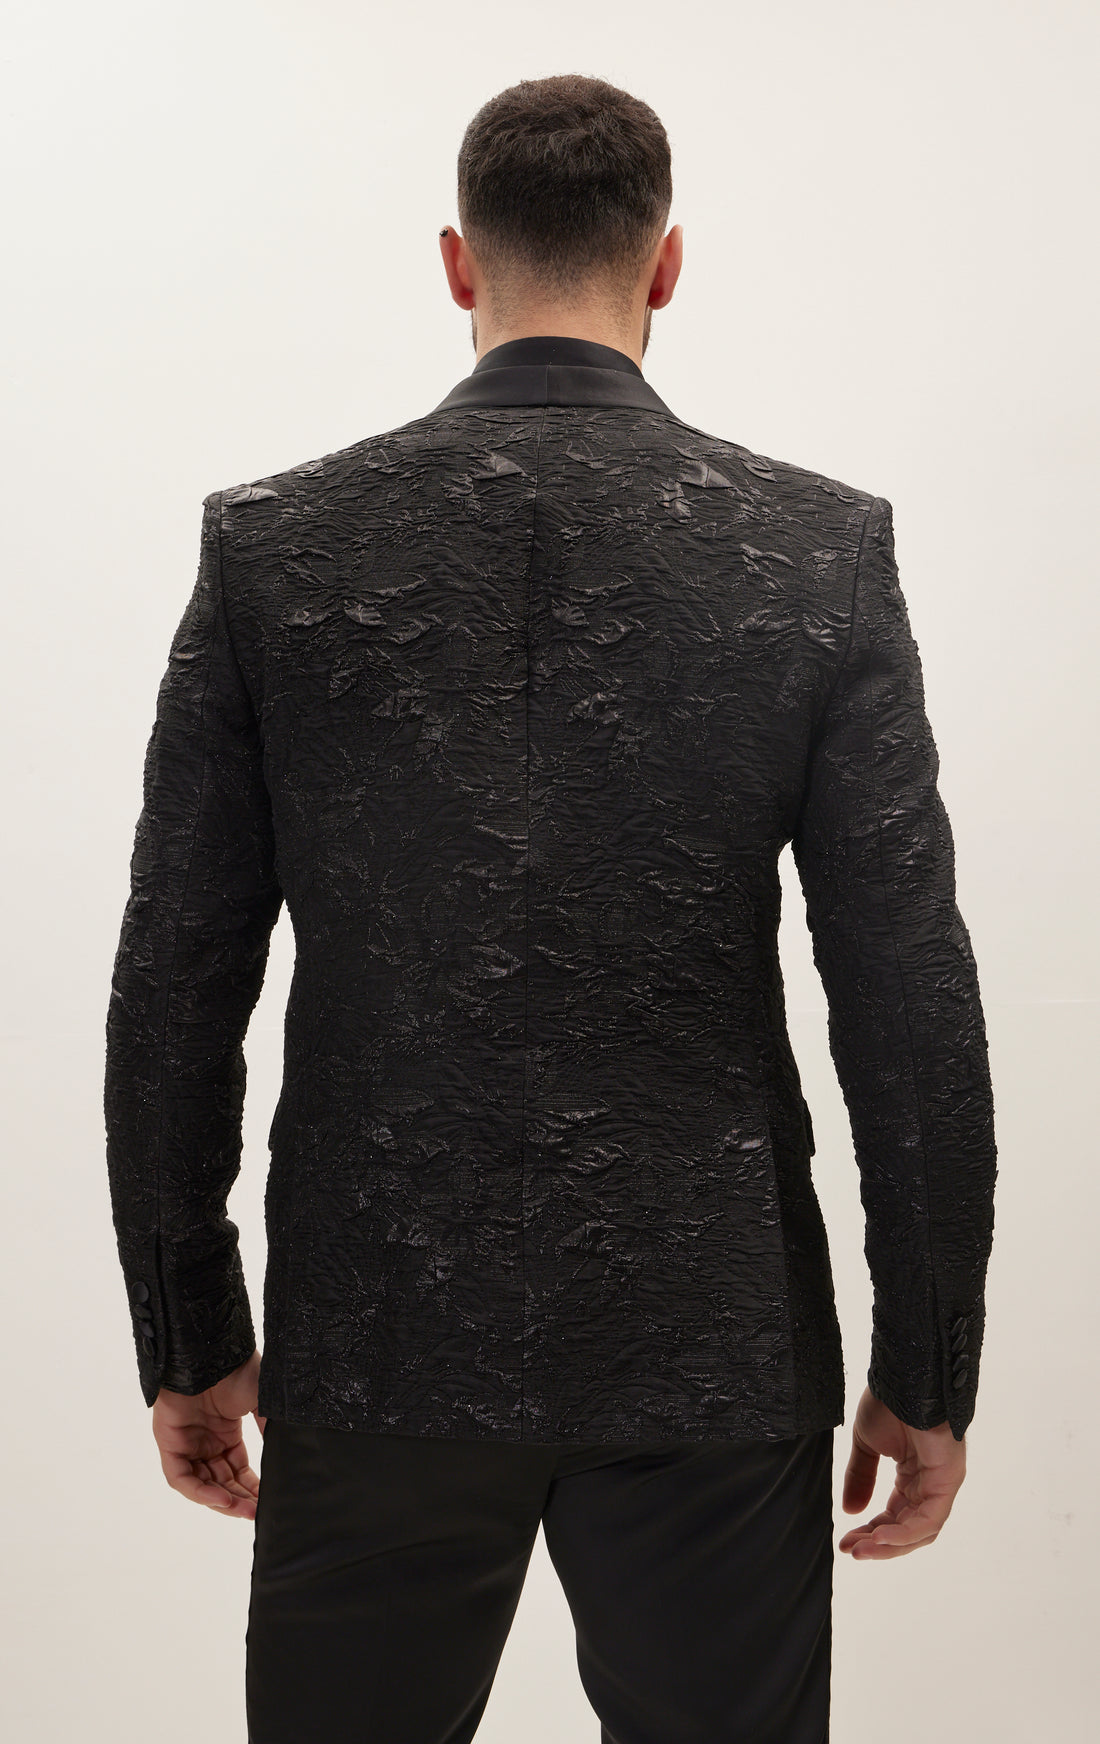 Embroidered Quilt Patterns Shawl Lapel Tuxedo Jacket - Black Silver